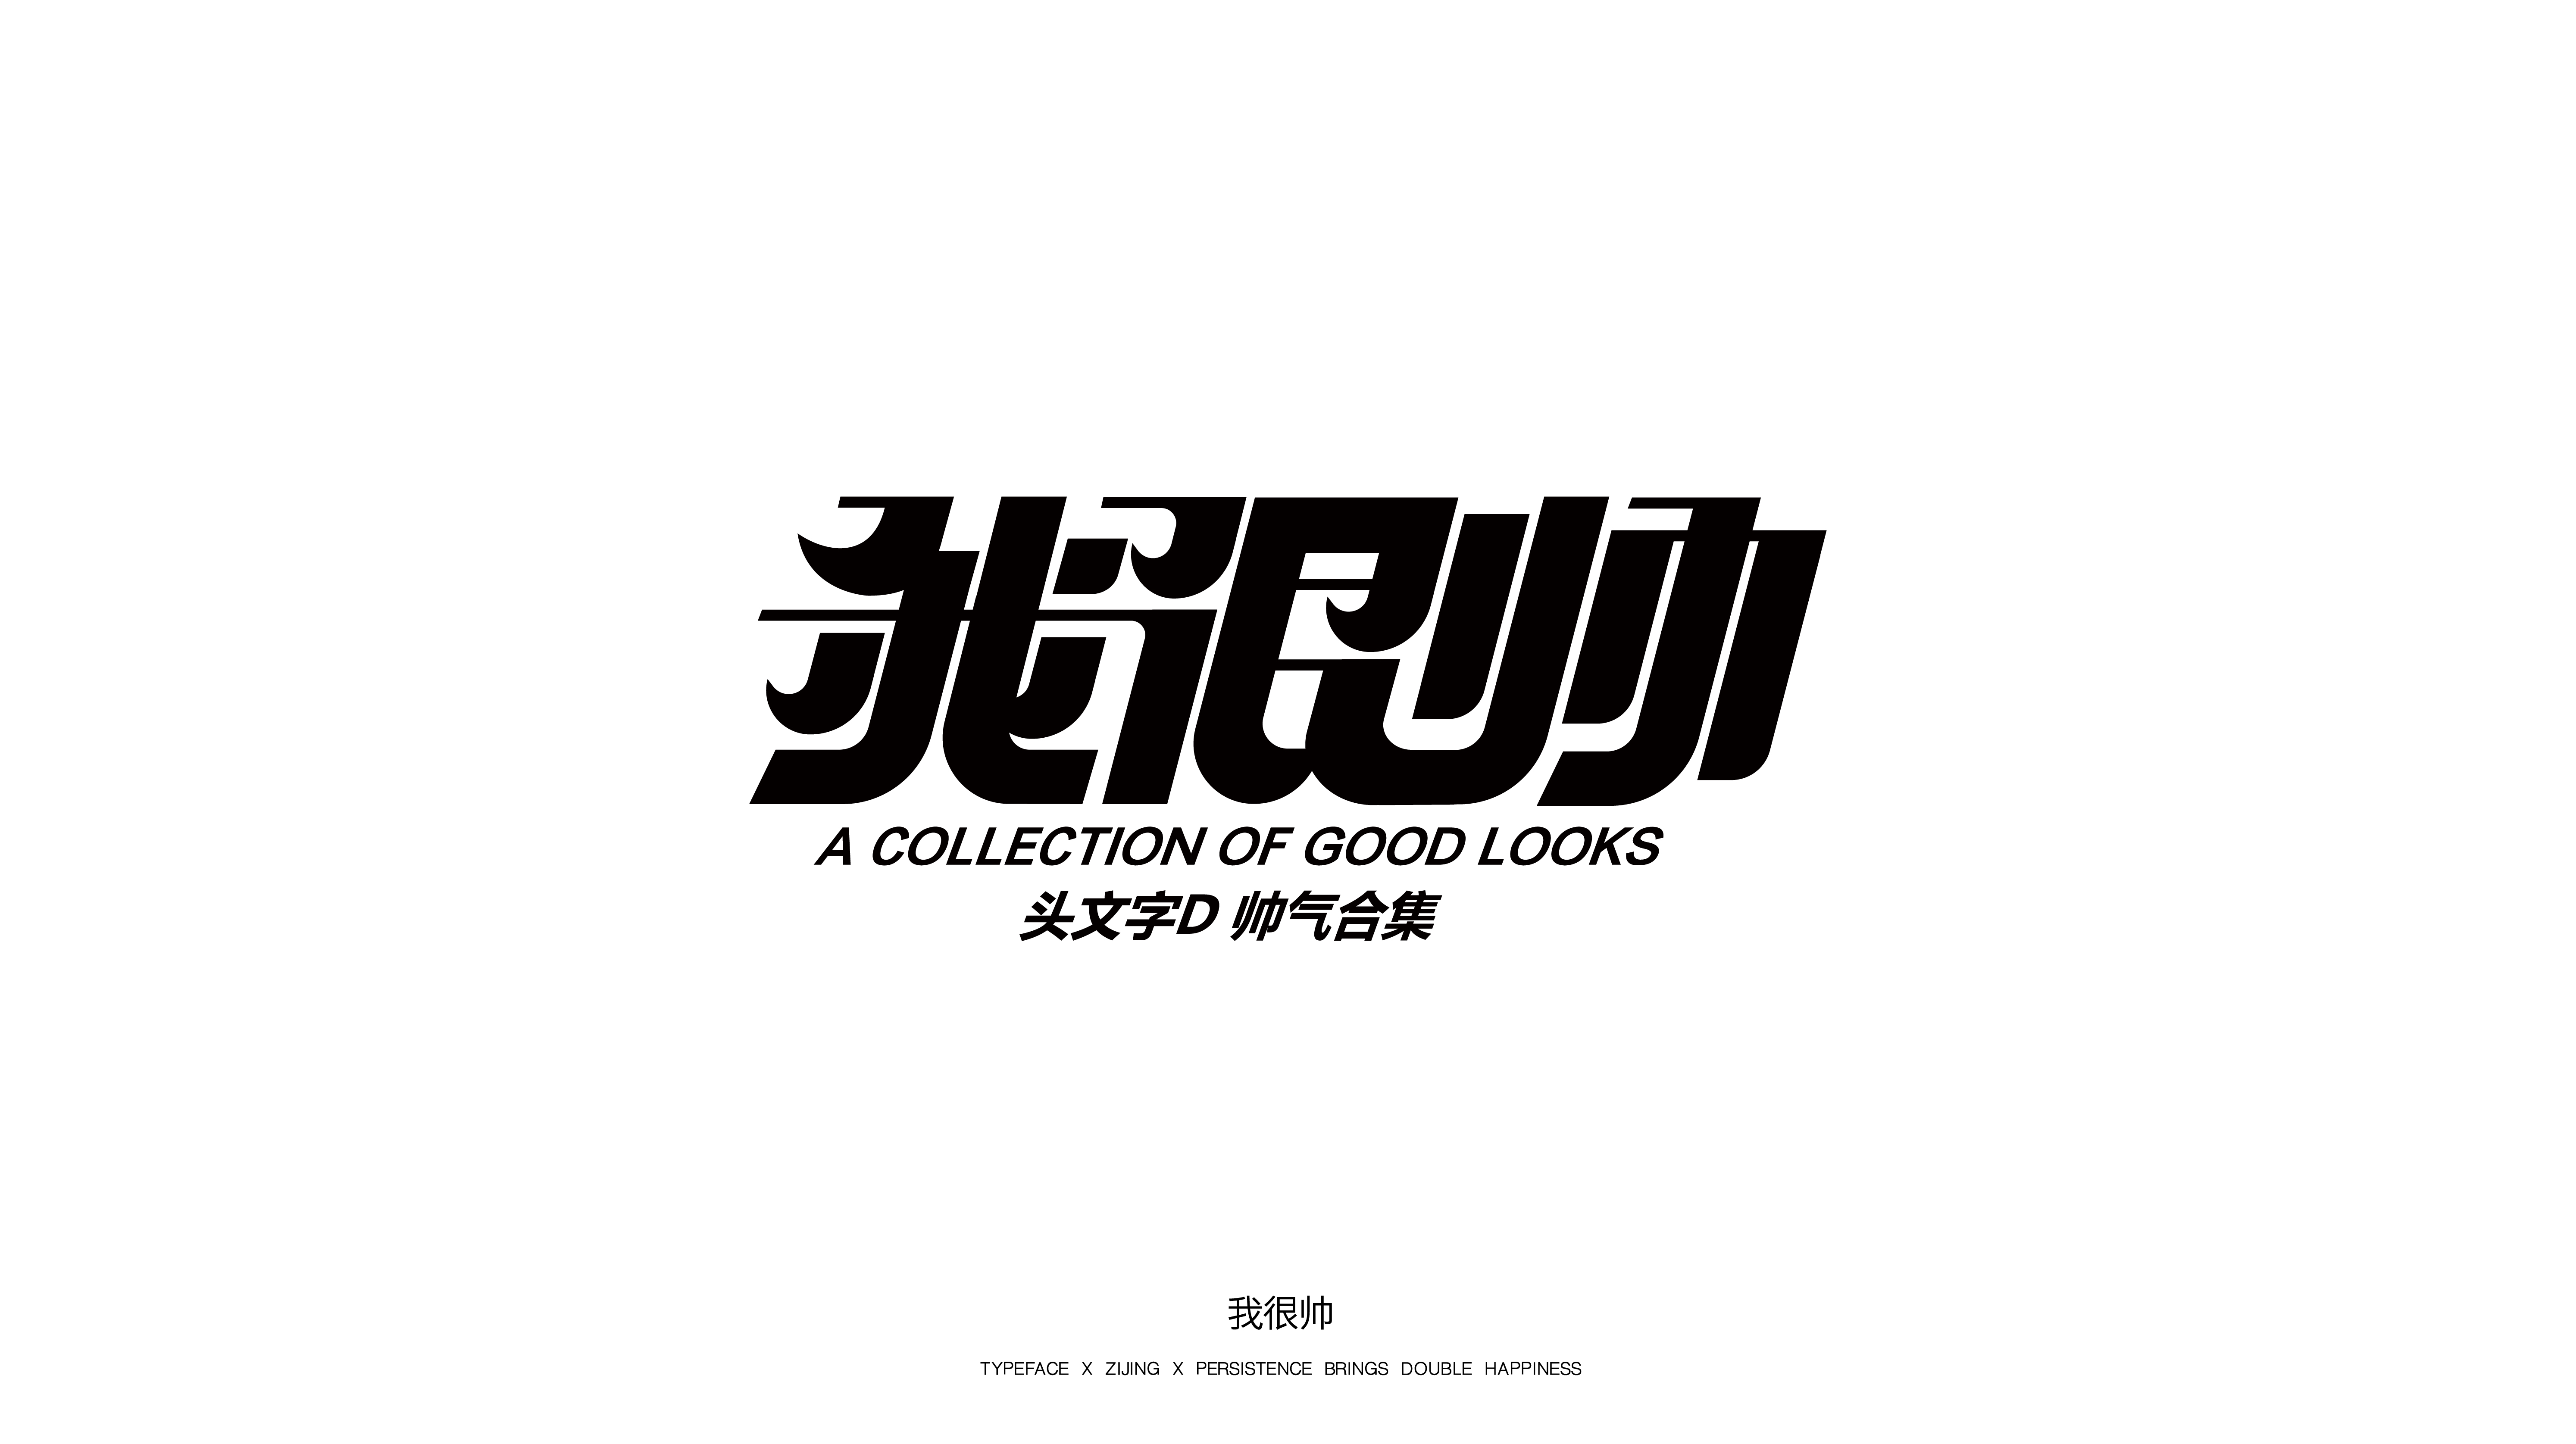 31P Collection of the latest Chinese font design schemes in 2021 #.206